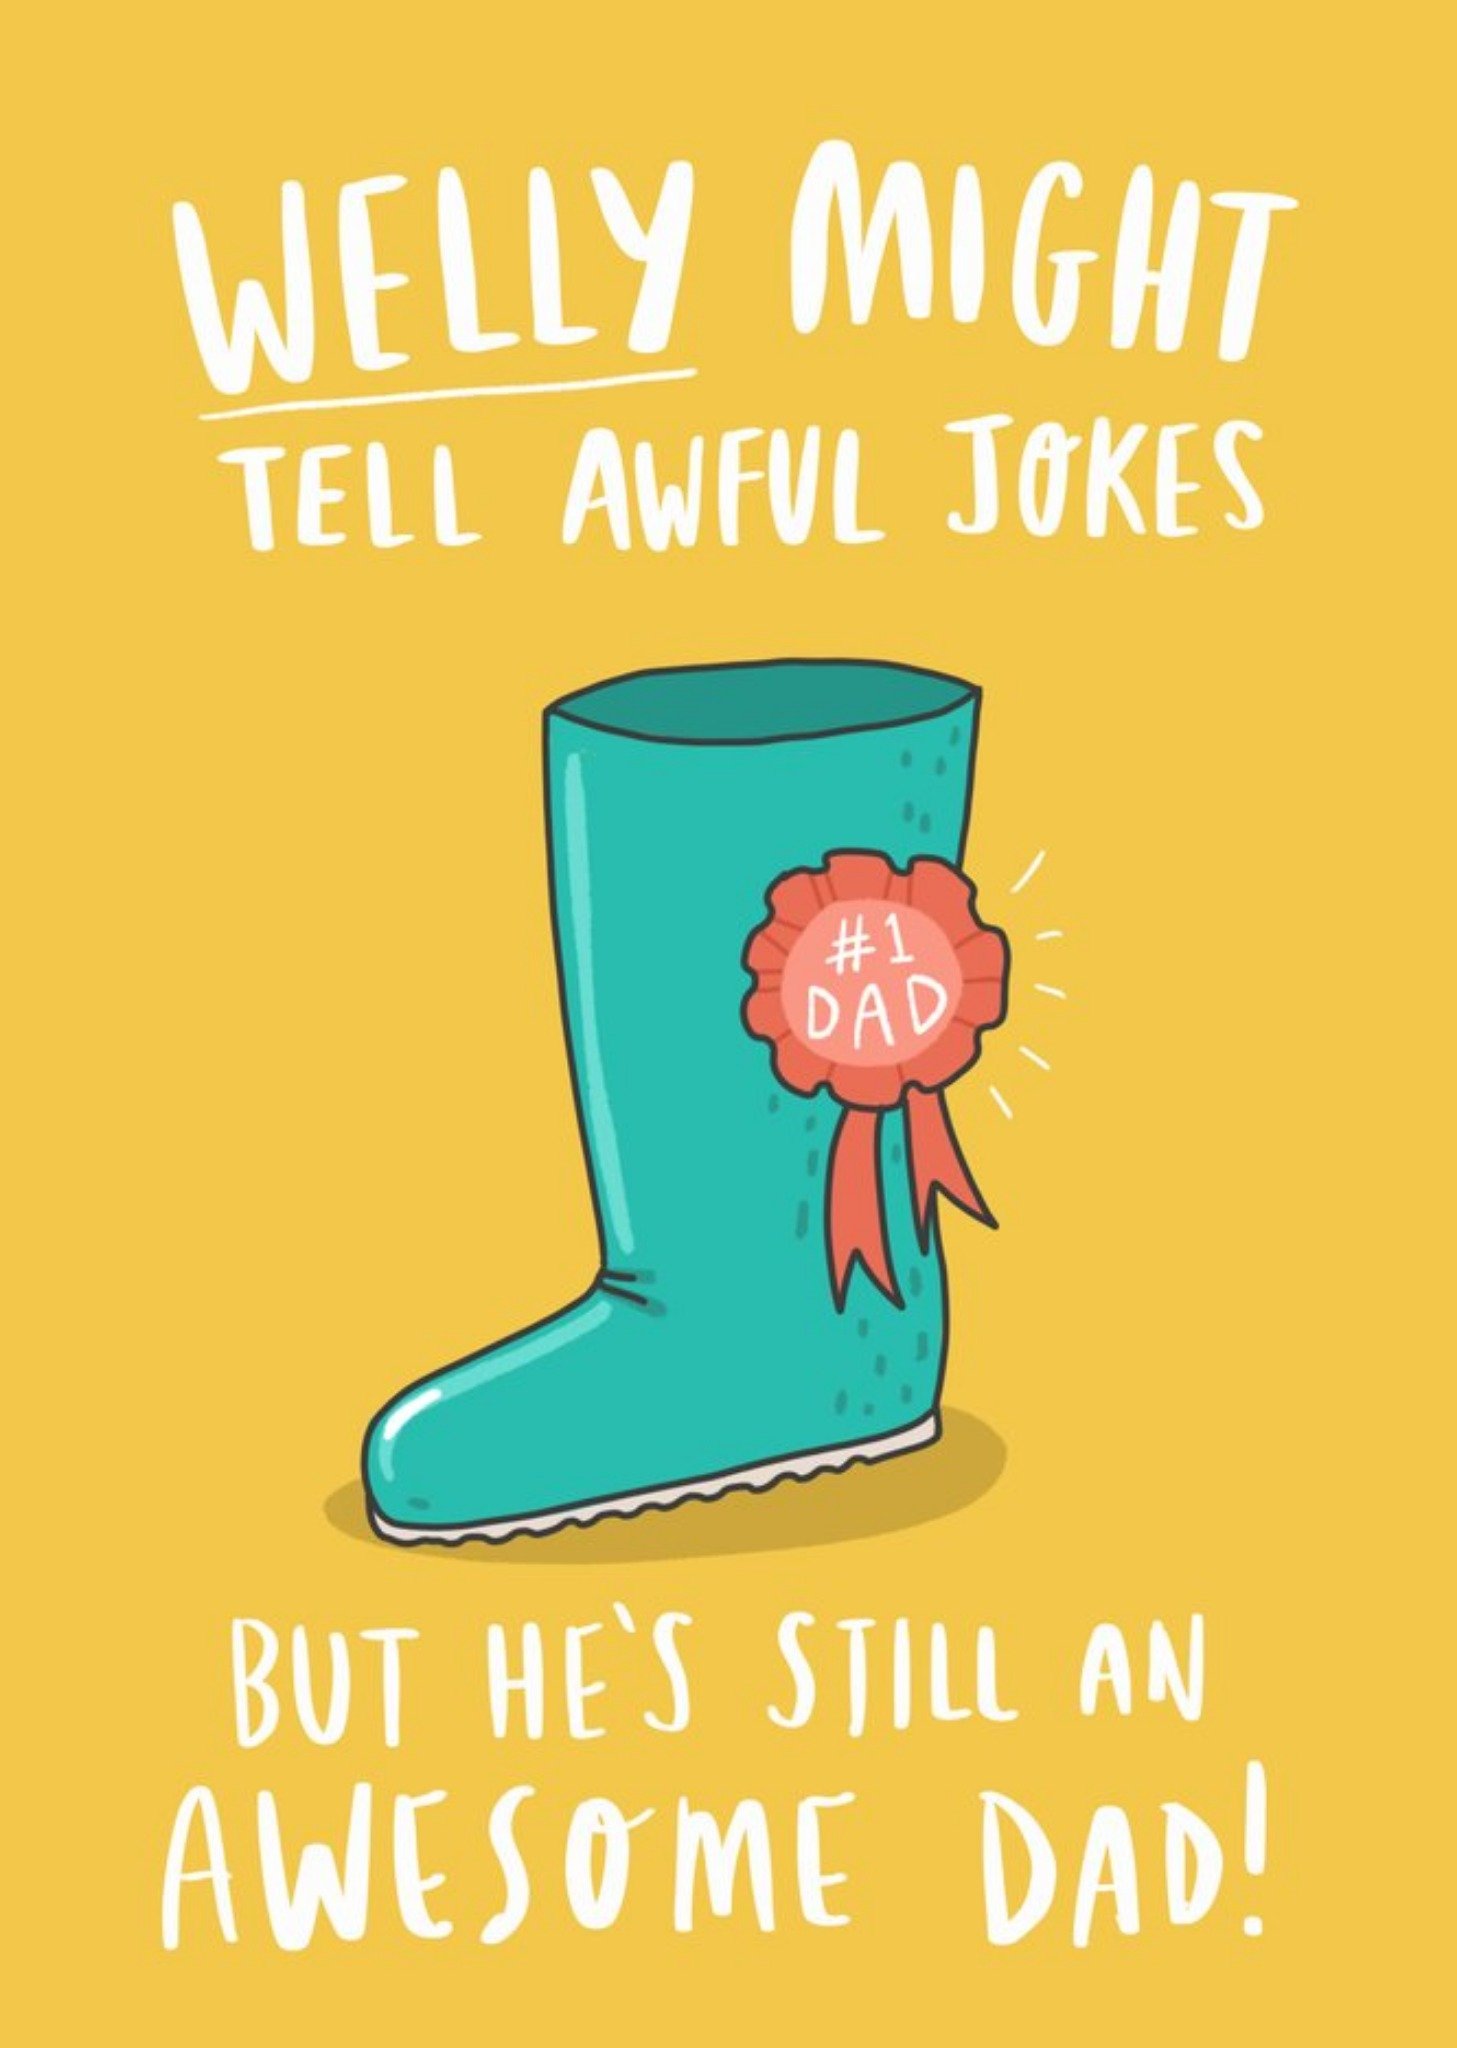 Moonpig Funny Pun Welly Might Tell Awful Jokes Awesome Dad Card Ecard